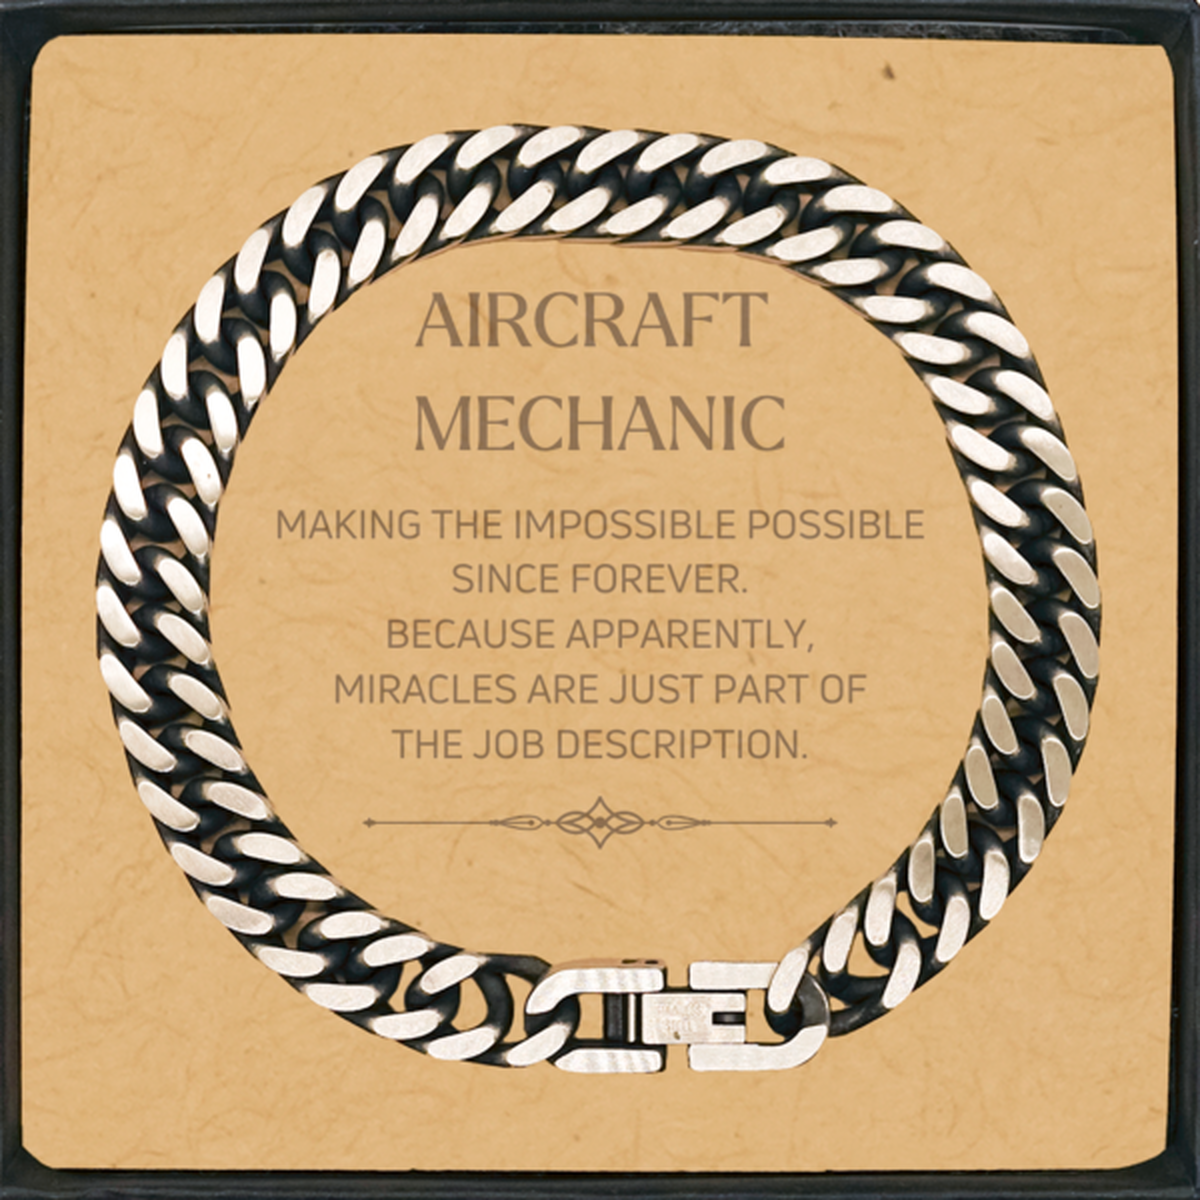 Funny Aircraft Mechanic Gifts, Miracles are just part of the job description, Inspirational Birthday Cuban Link Chain Bracelet For Aircraft Mechanic, Men, Women, Coworkers, Friends, Boss